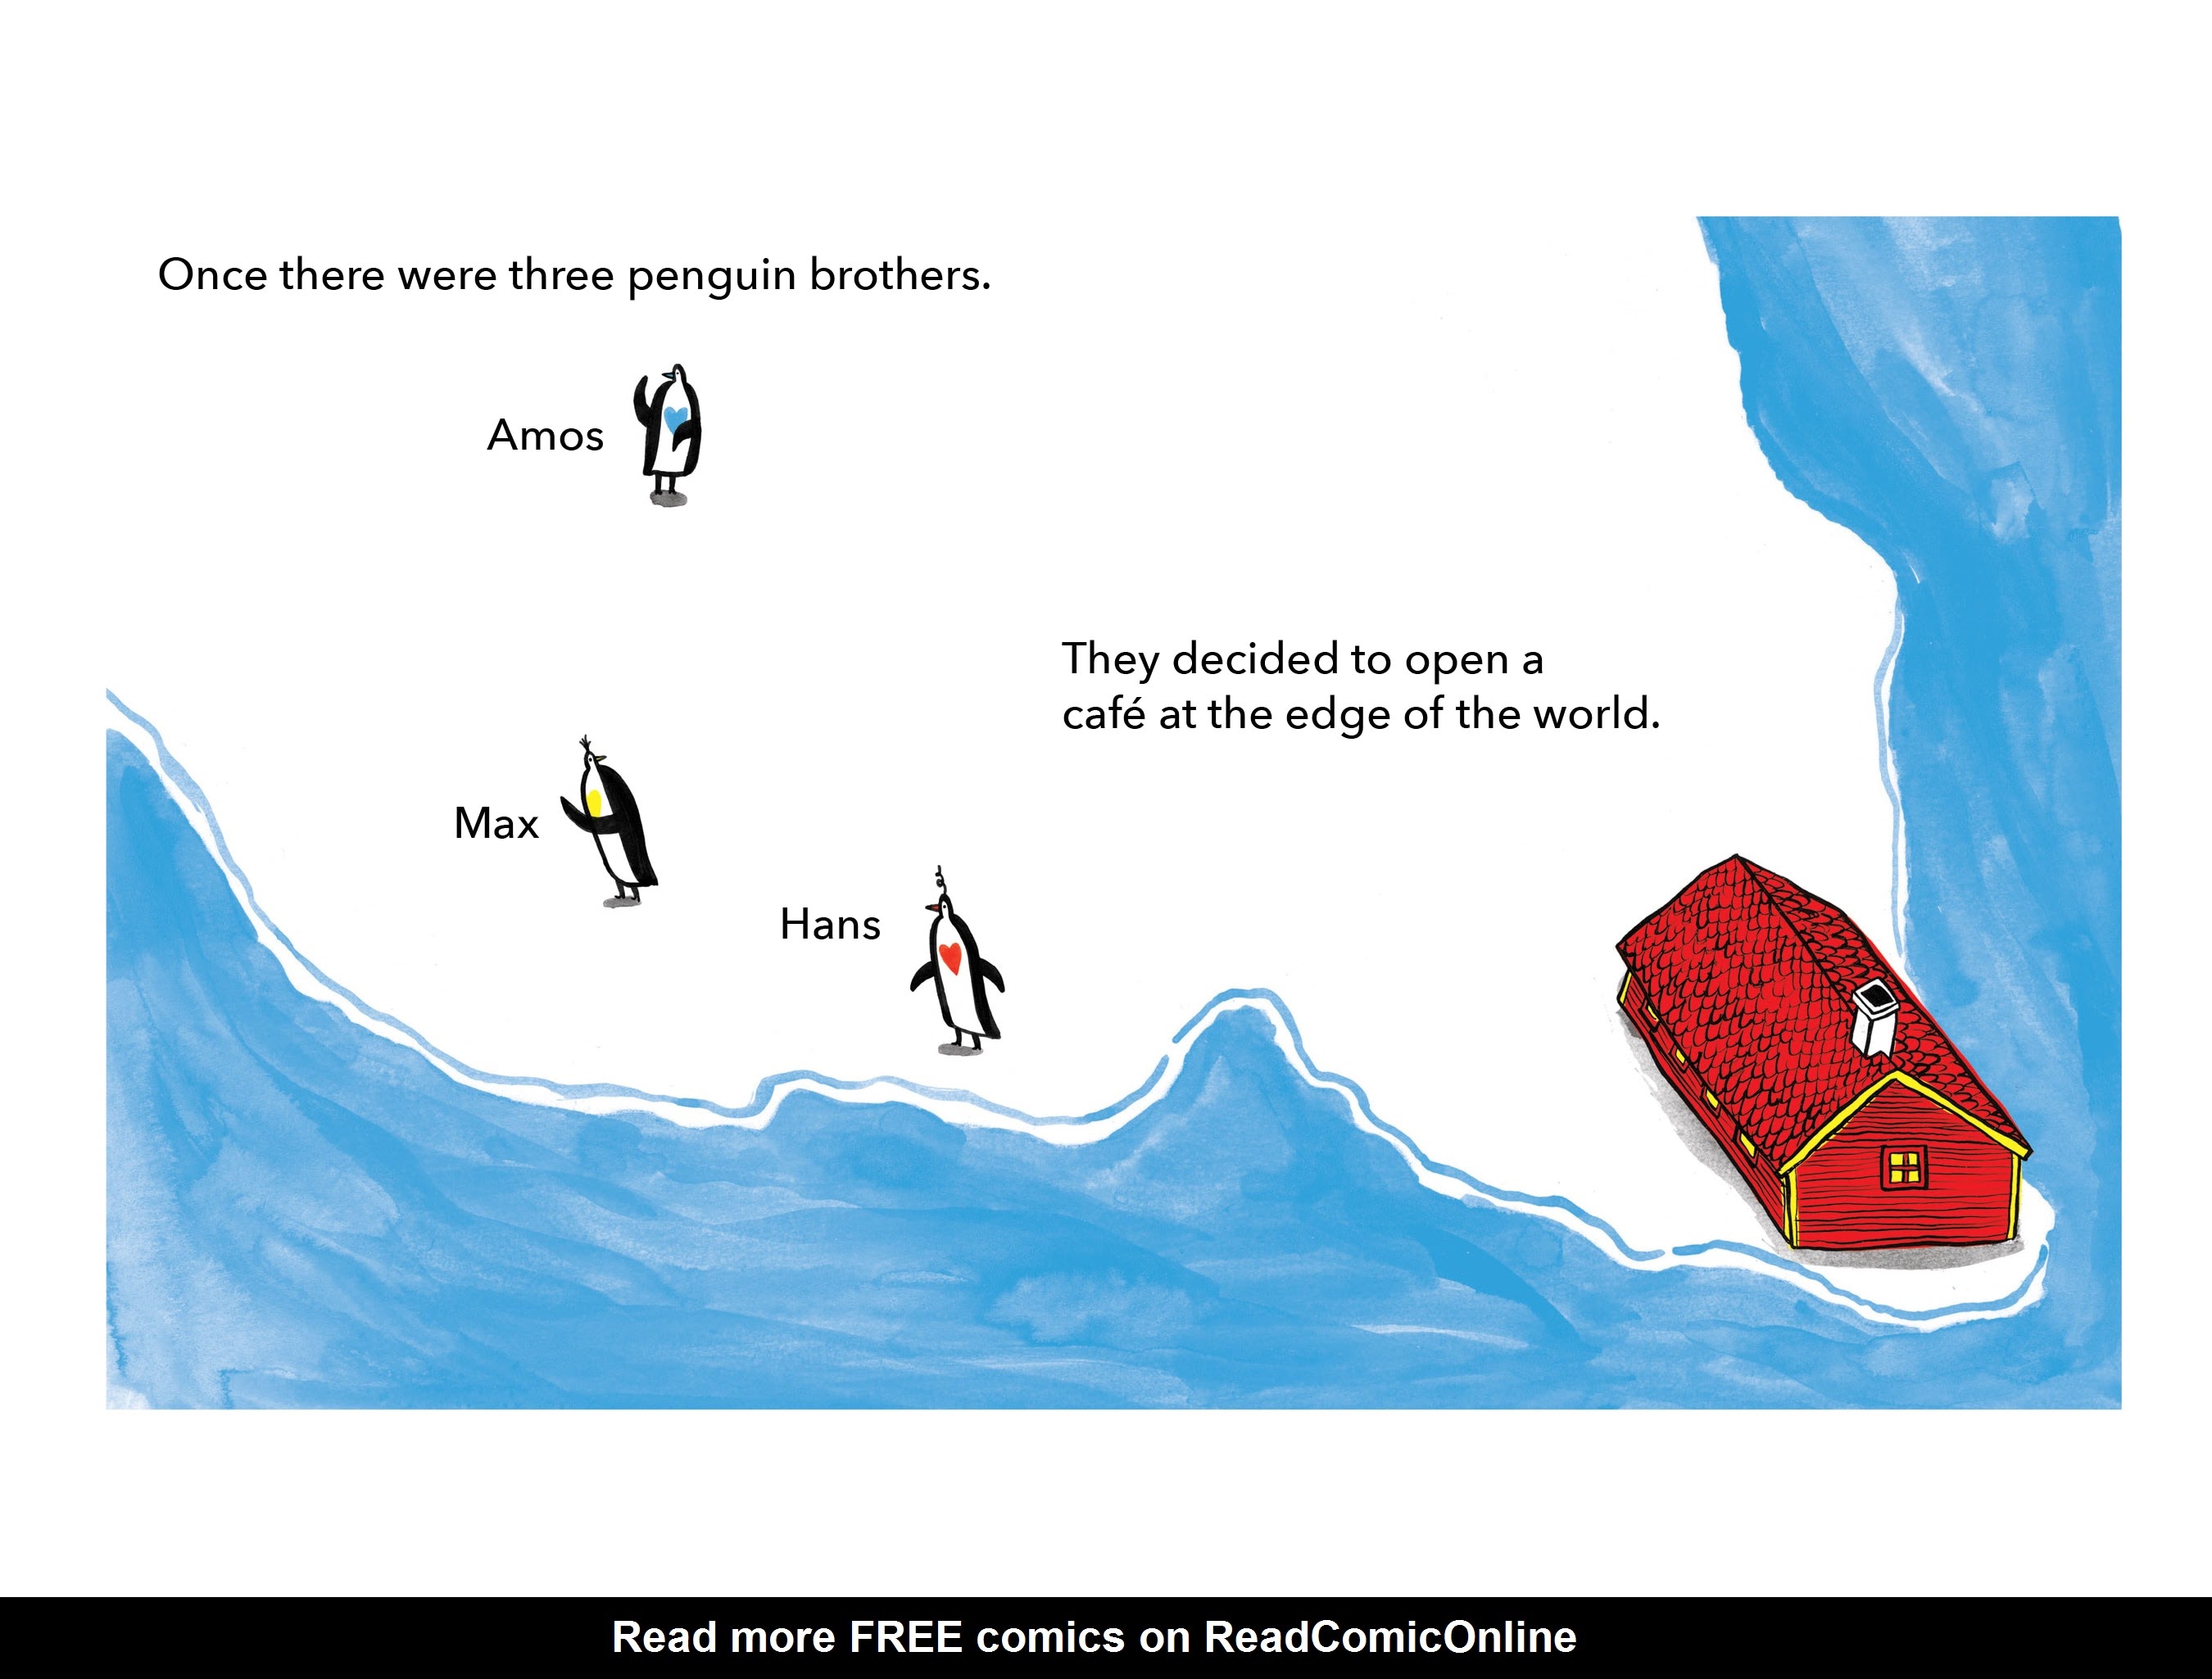 Read online The Penguin Café at the Edge of the World comic -  Issue # Full - 3